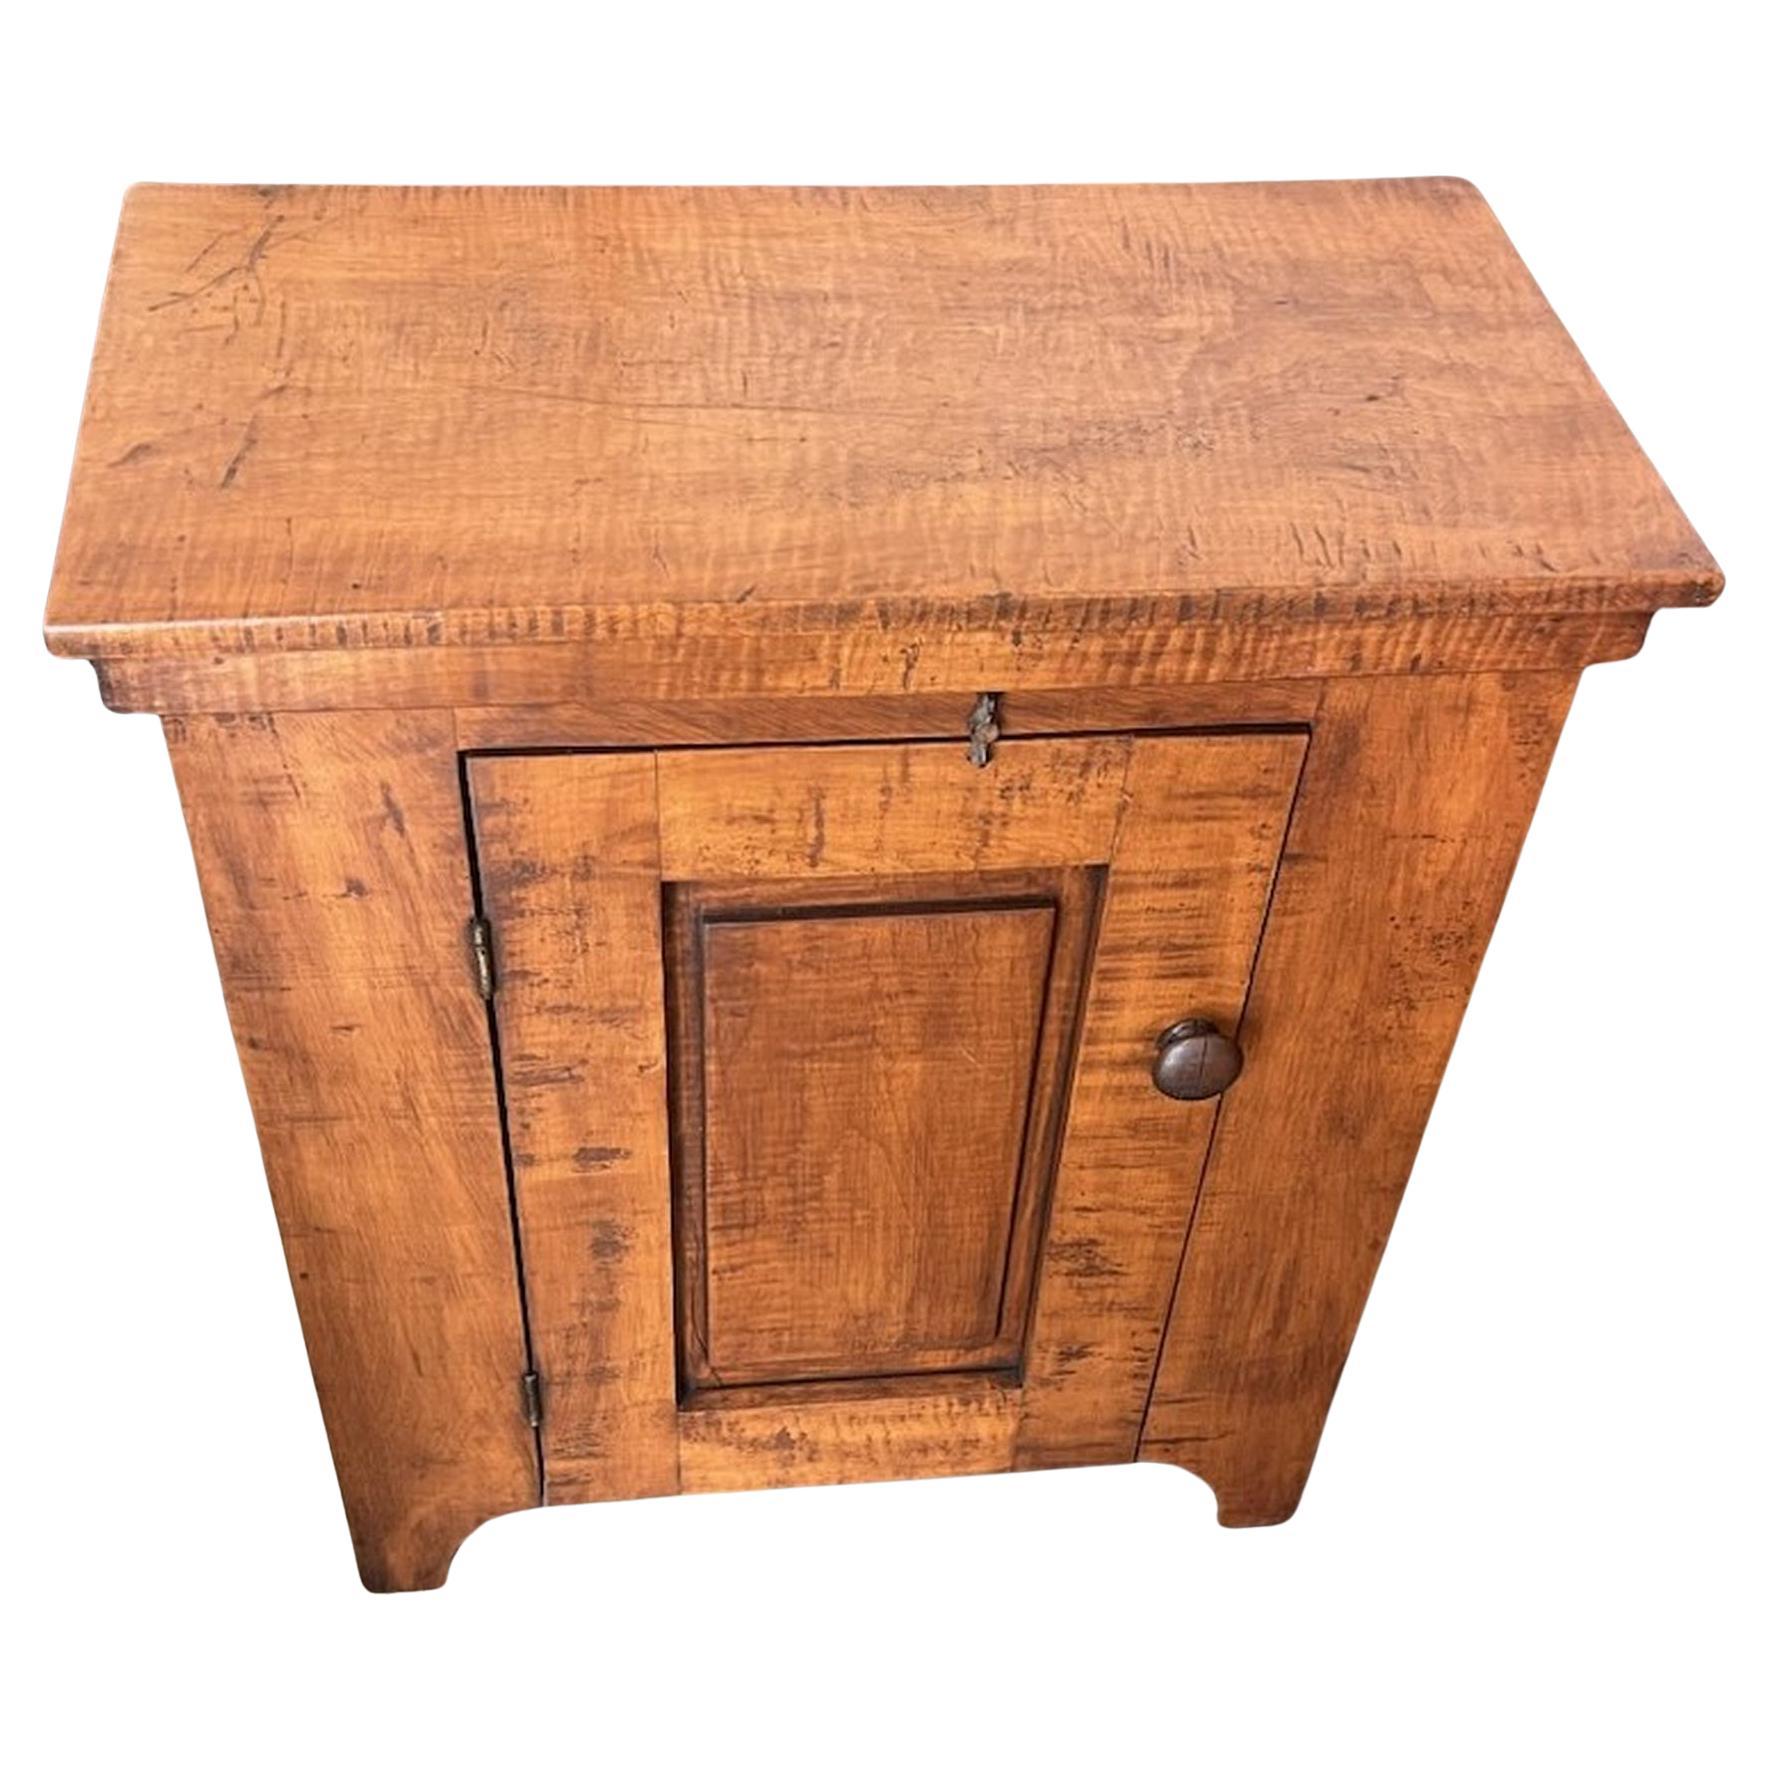 19Thc Birdseye Maple floor cabinet with original hardware and fine patina.It looks like it has a later wood backing.The condition is very good.